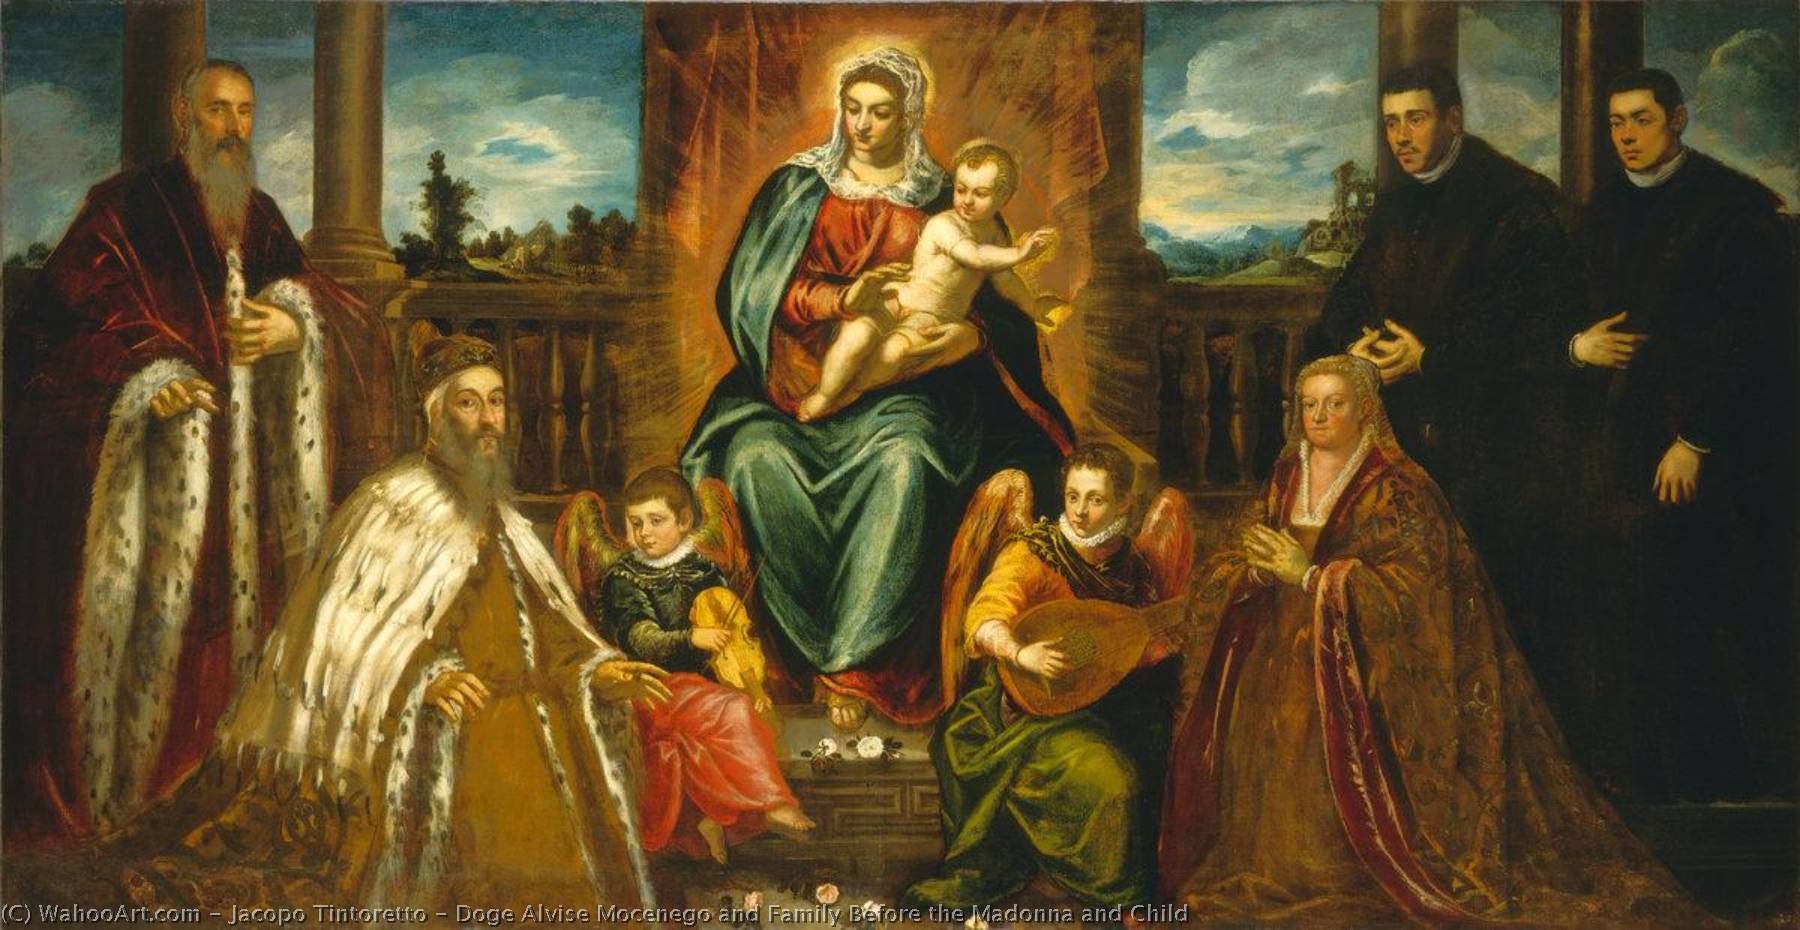 WikiOO.org - Encyclopedia of Fine Arts - Malba, Artwork Jacopo Tintoretto - Doge Alvise Mocenego and Family Before the Madonna and Child